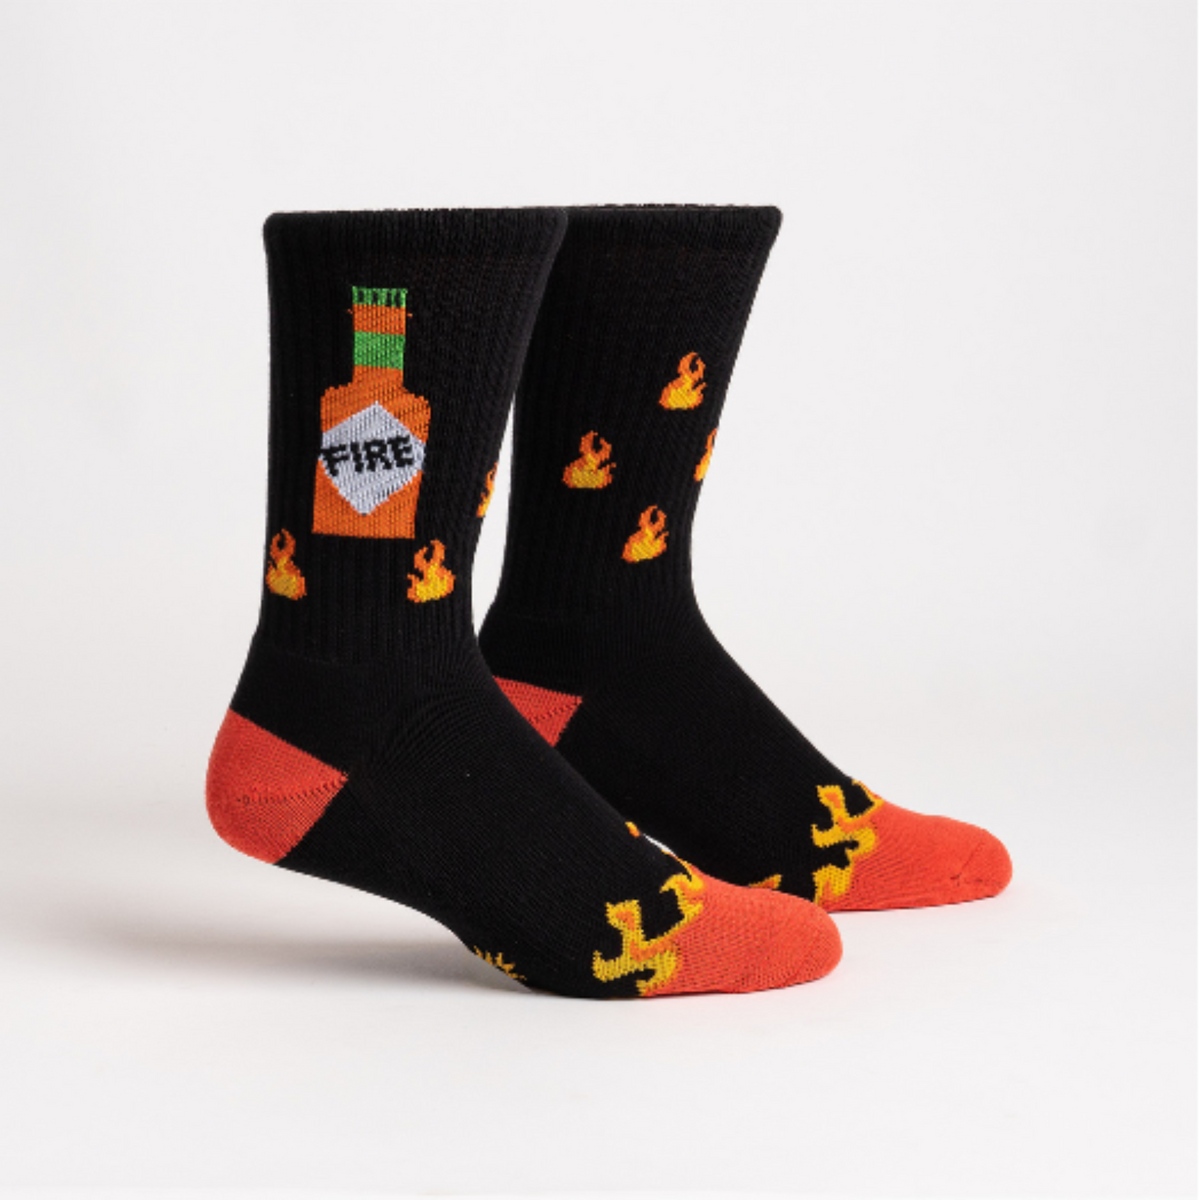 Sock It To Me Fire athletic crew men&#39;s sock featuring black socks with an image of flames and hot sauce bottle. Socks shown on display feet from side. 